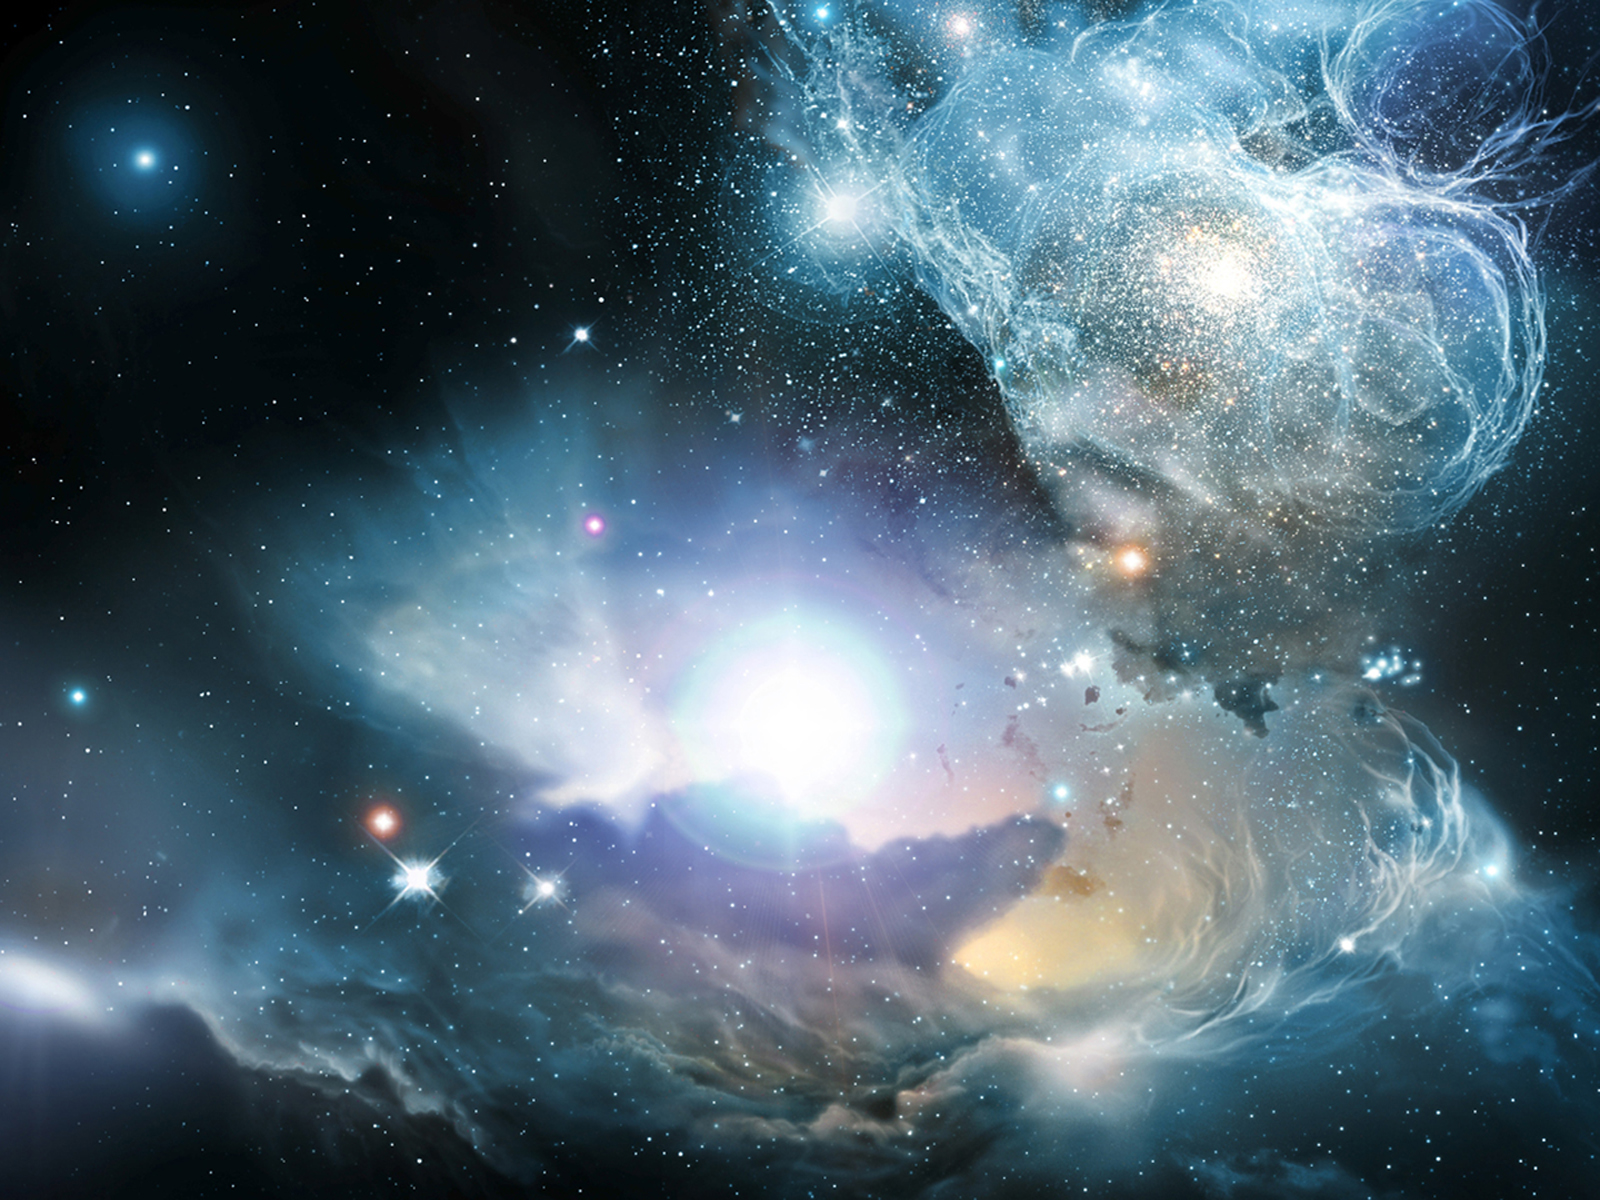 HD Amazing Pictures: Amazing pictures of the universe